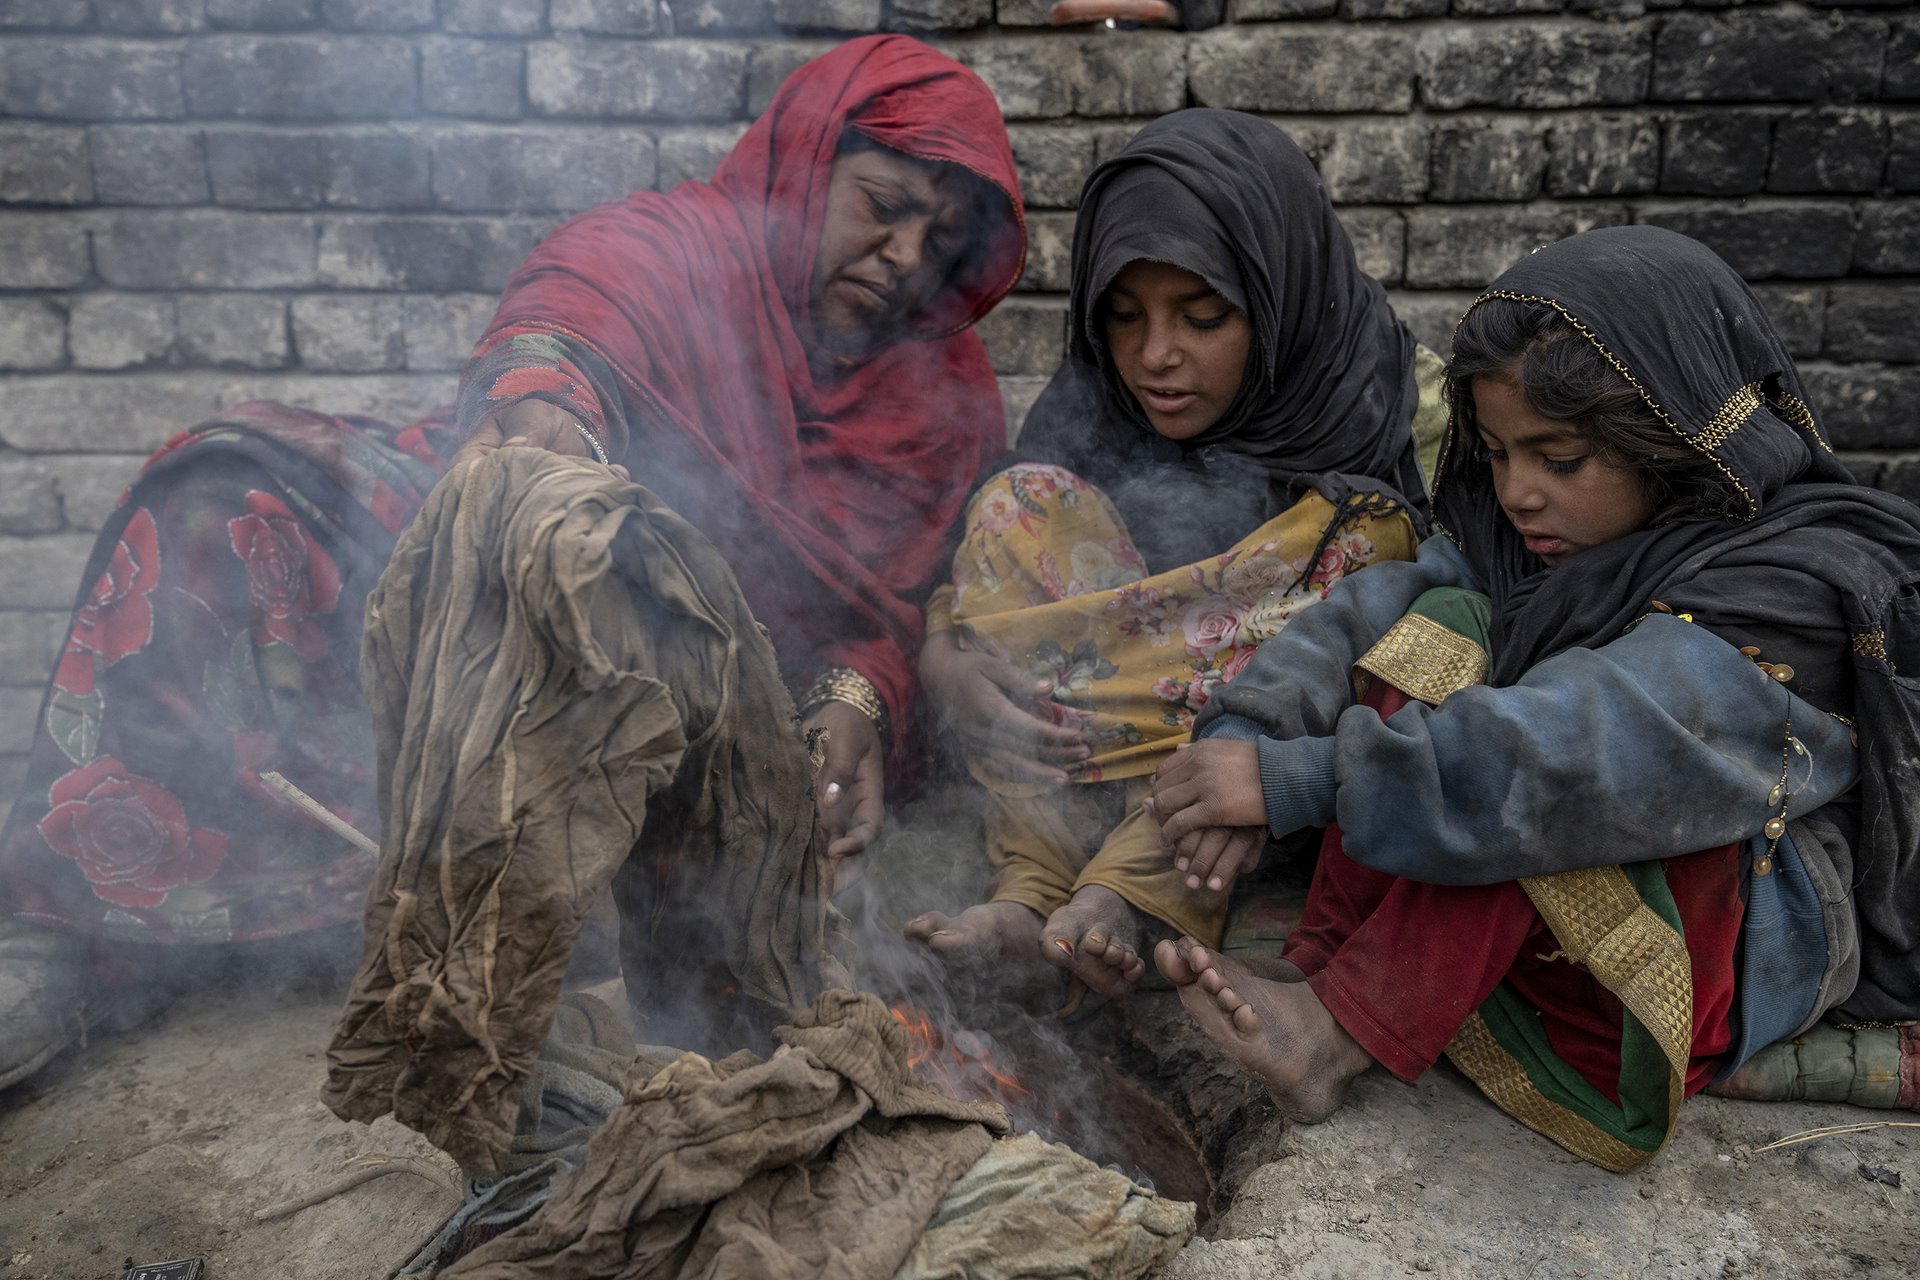 A family warms up by burning garbage in winter, in the Bagrami camp &nbsp;for internally displaced people on the outskirts of Kabul, Afghanistan.